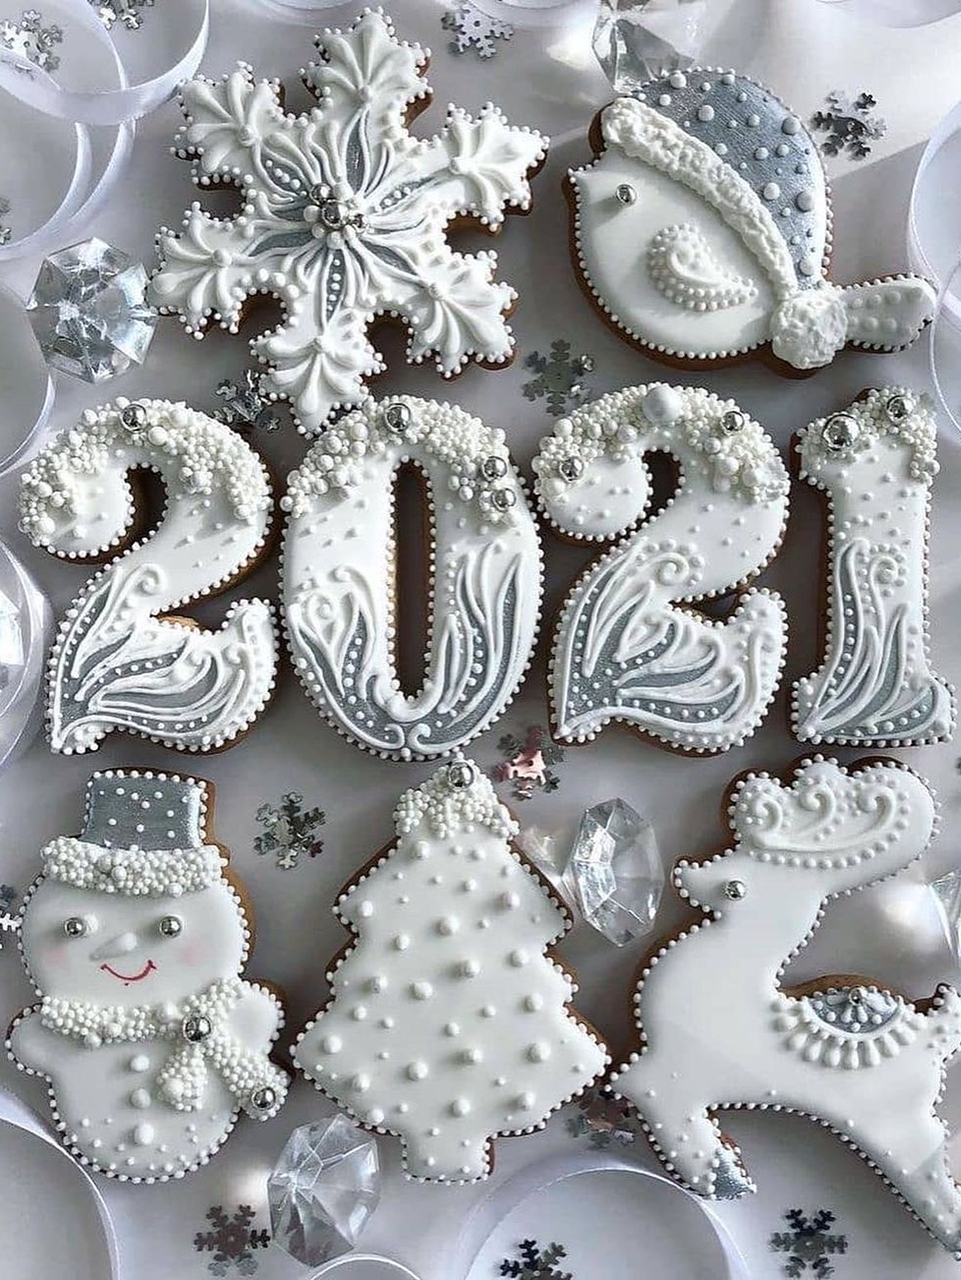 The best cookie designs to welcome you into the year 2021.